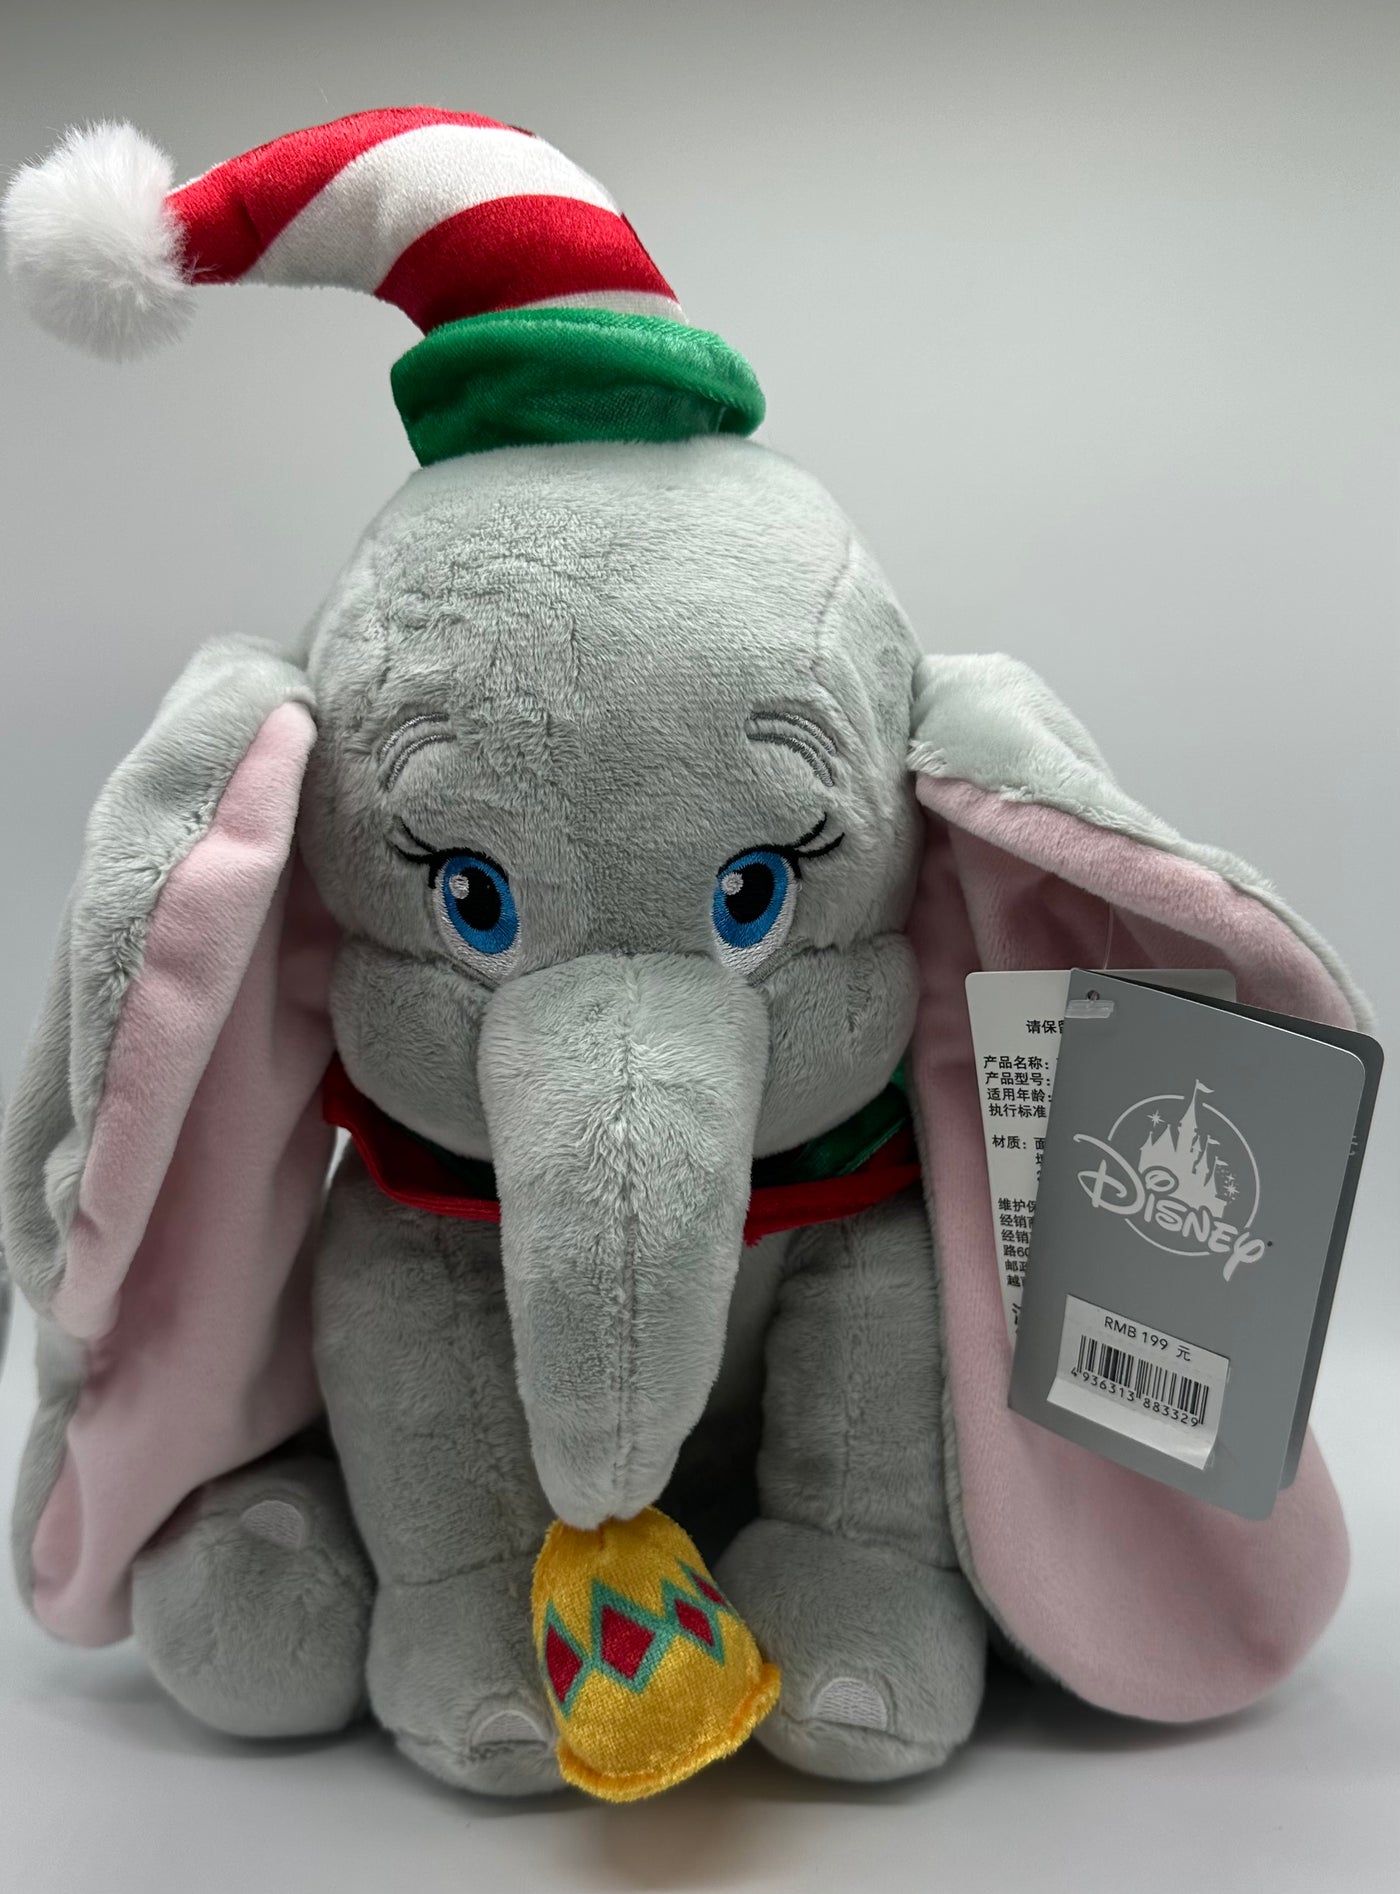 Disney Store Hong Kong Dumbo Christmas Plush with Rattle New with Tags